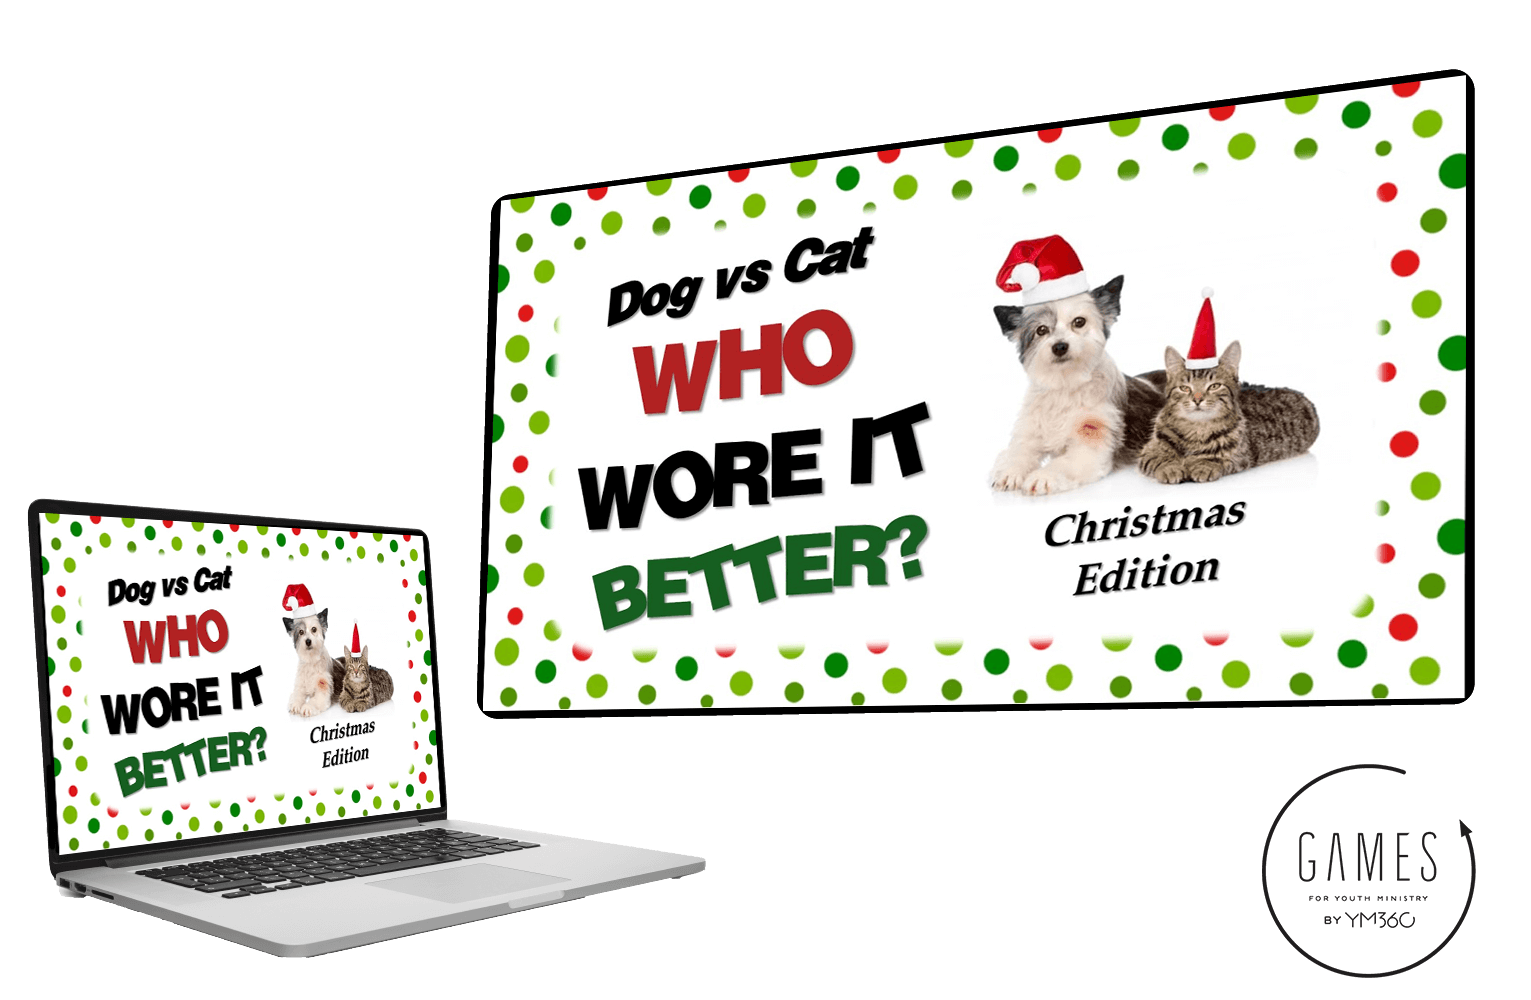 Dog vs Cat: Who Wore It Better Christmas Edition